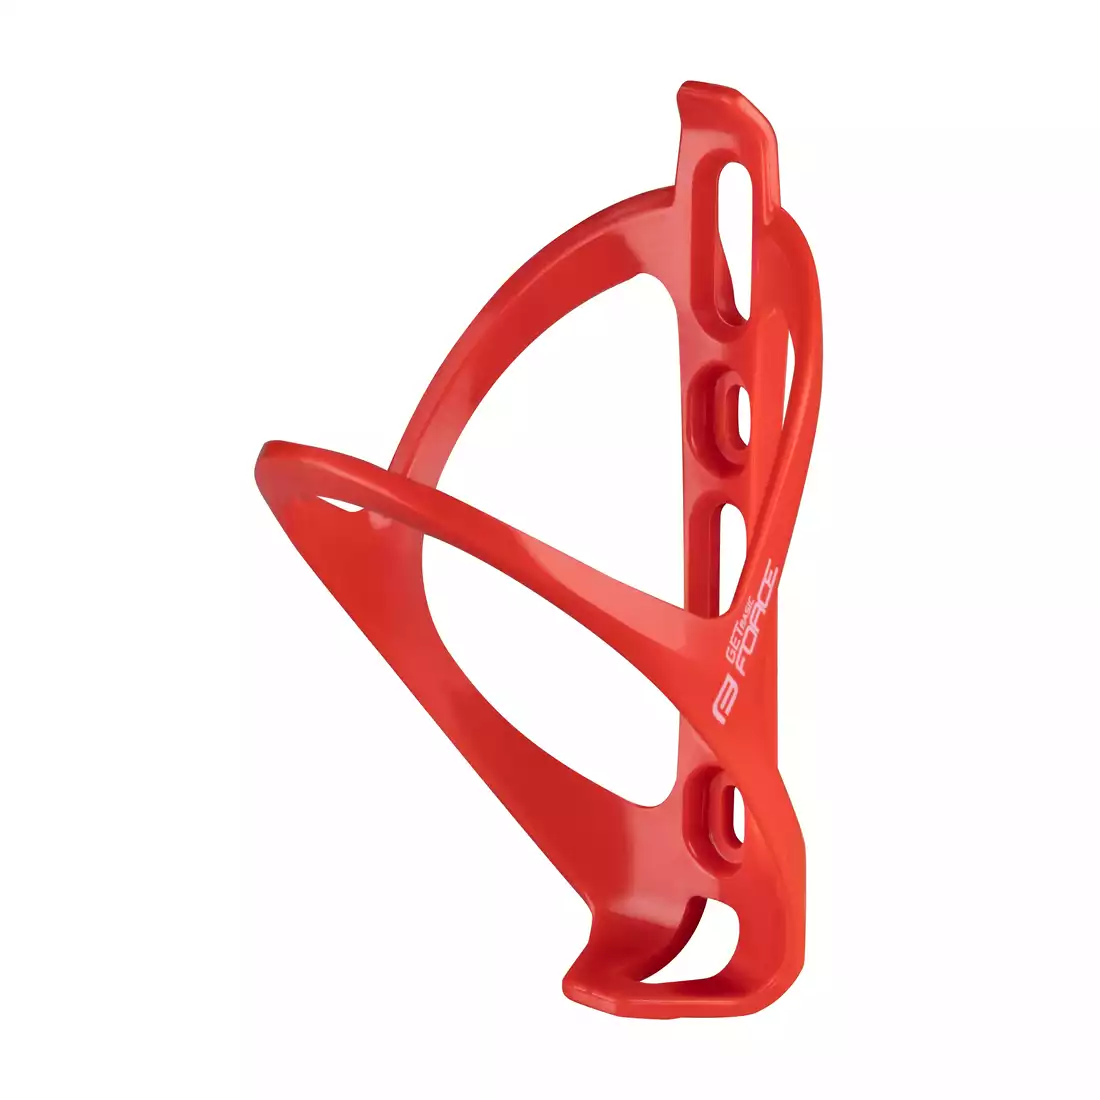 FORCE GET BASIC Bicycle water bottle cage, plastic, red